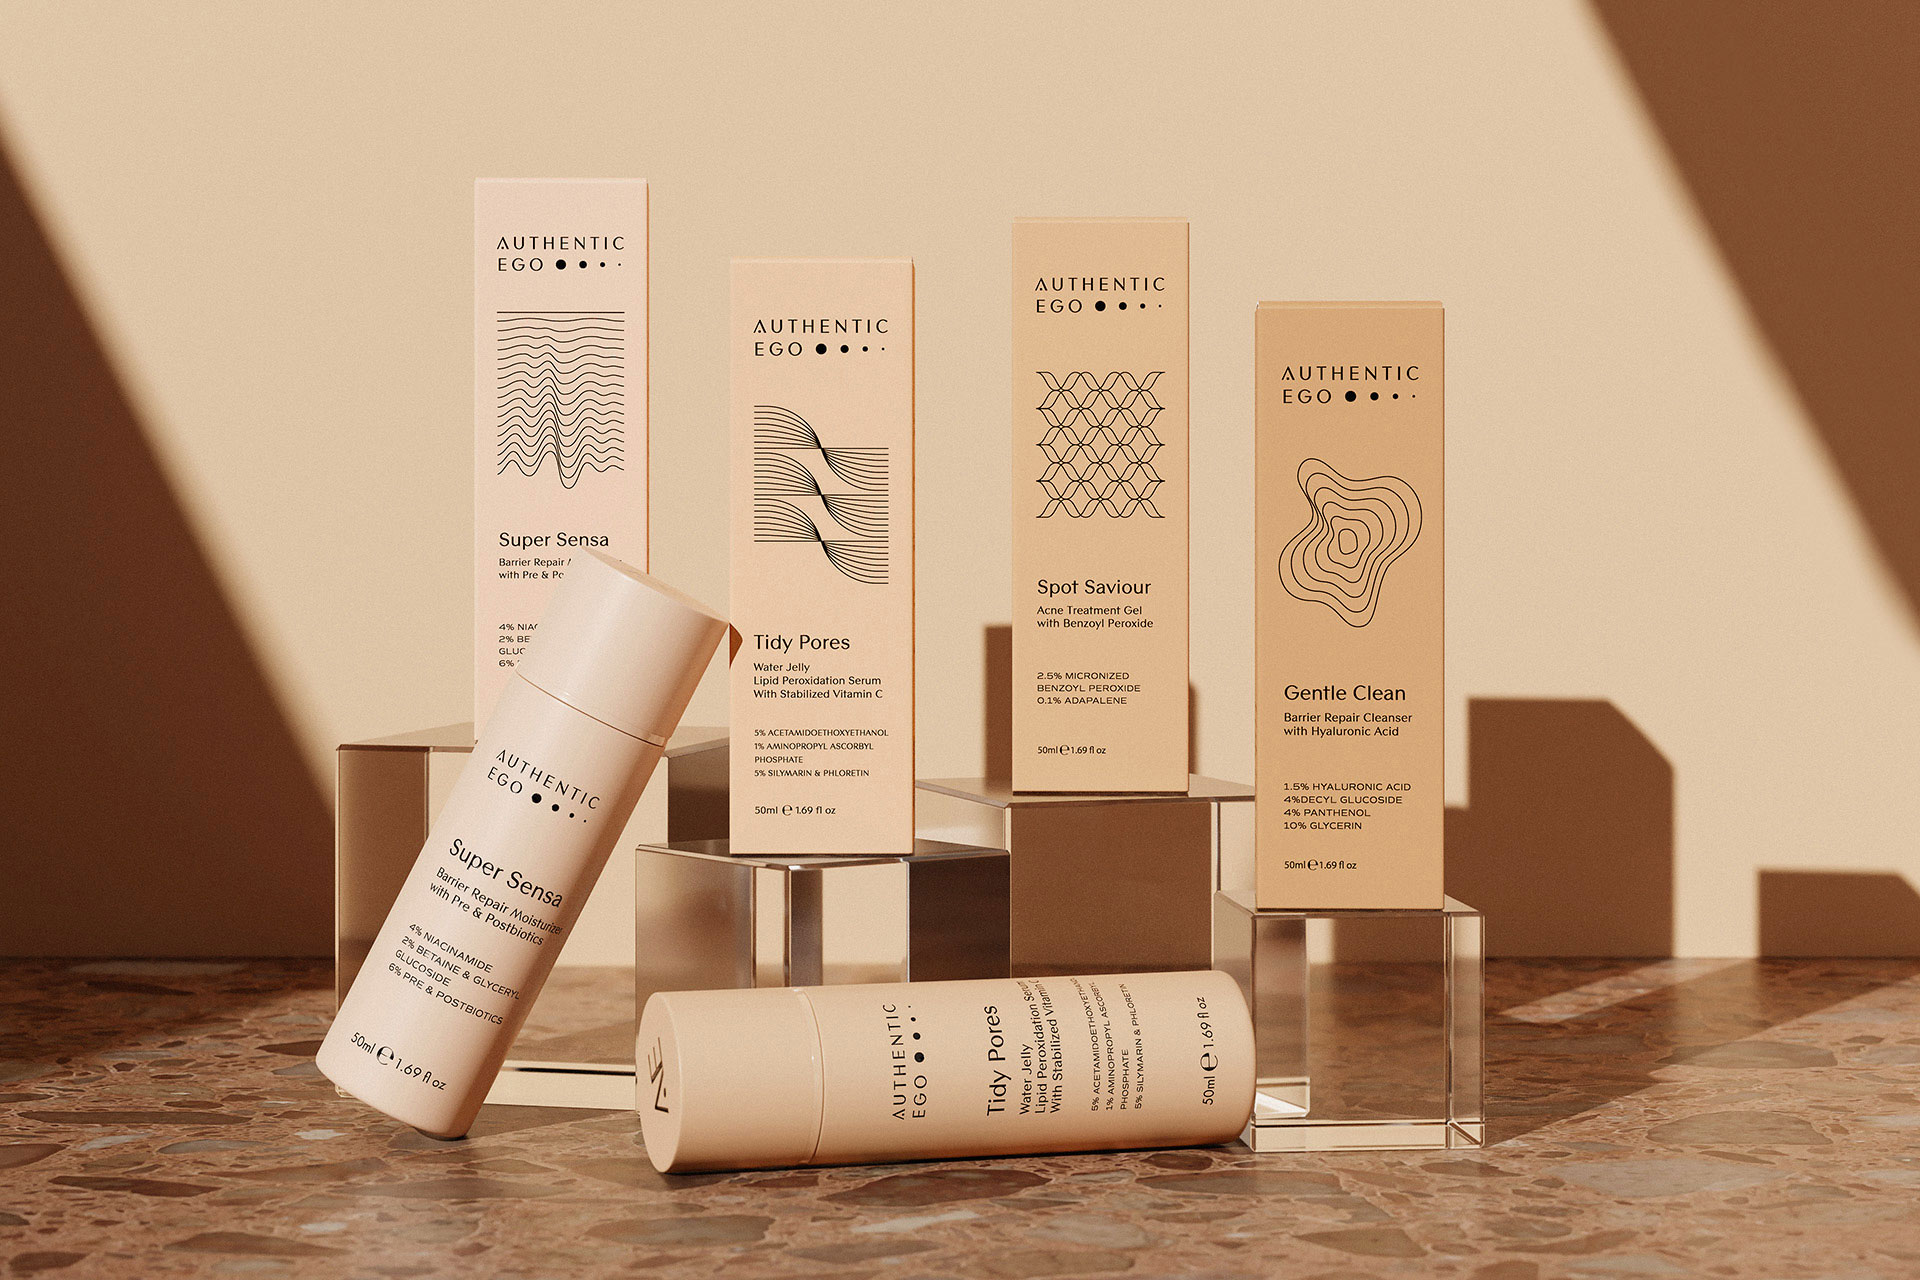 Necula Creative Creates Visual Identity and Packaging Design for Authentic Ego, Skincare That Fights Fundal Acne